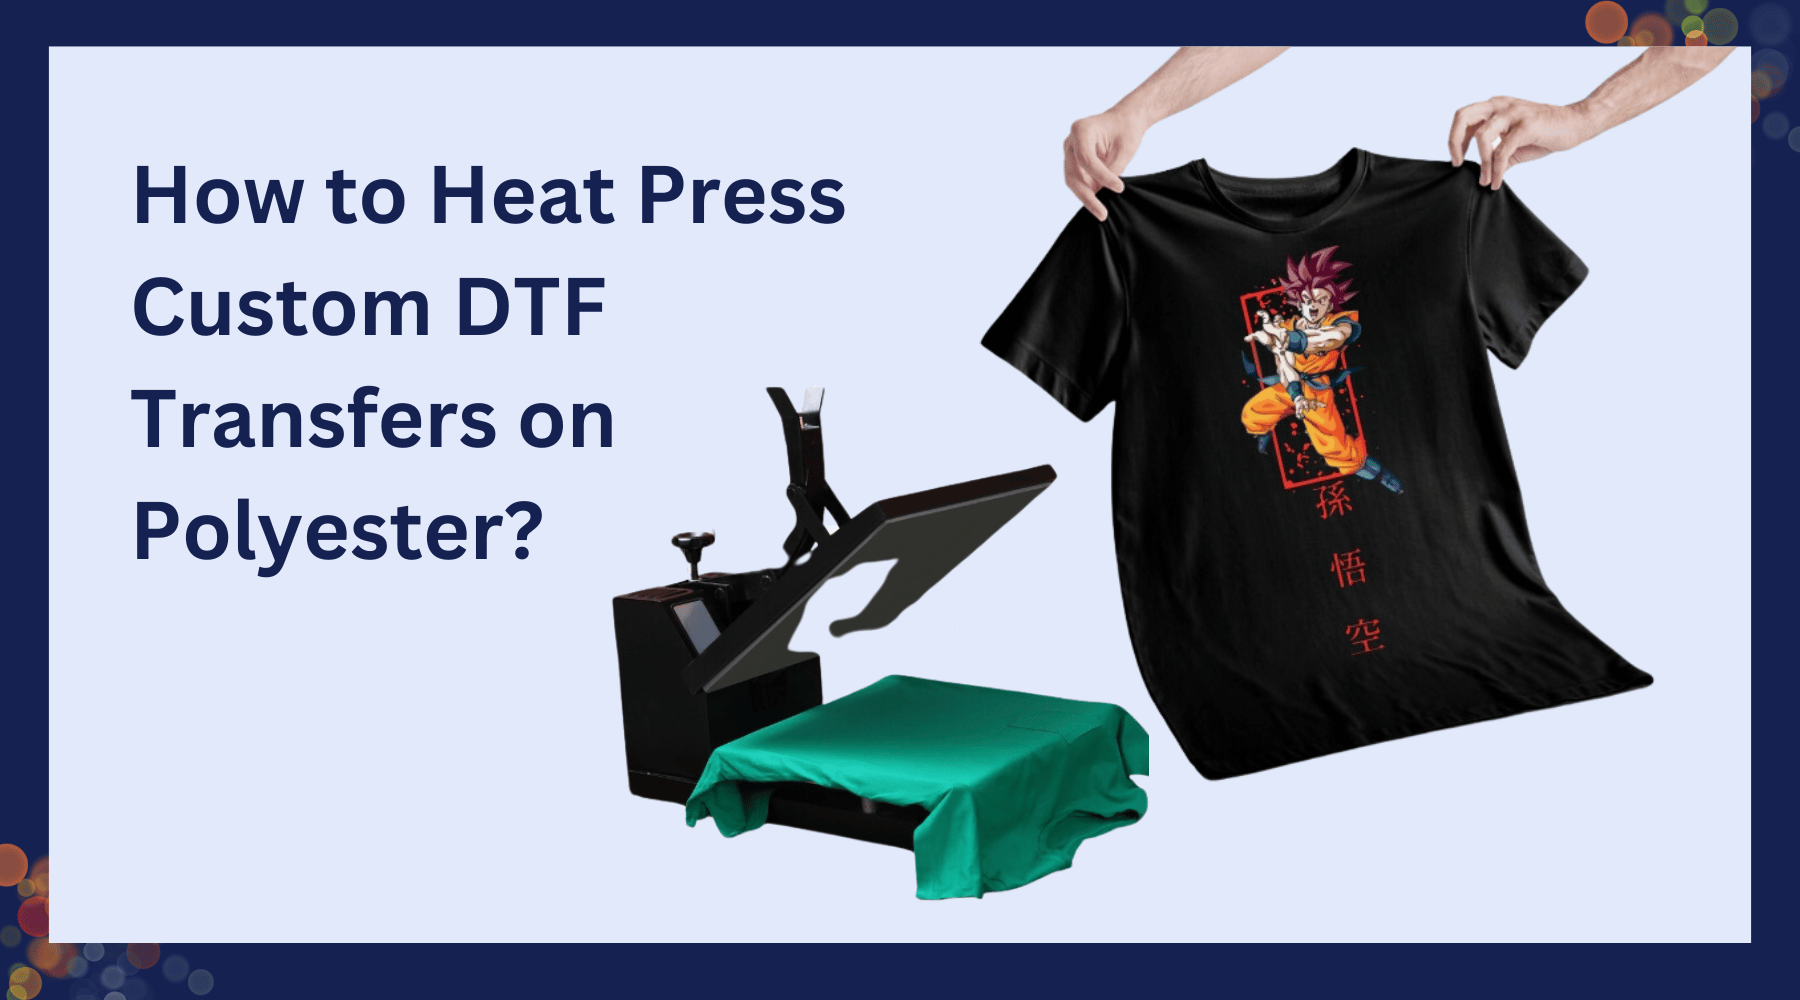 How to Heat Press Custom DTF Transfers on Polyester